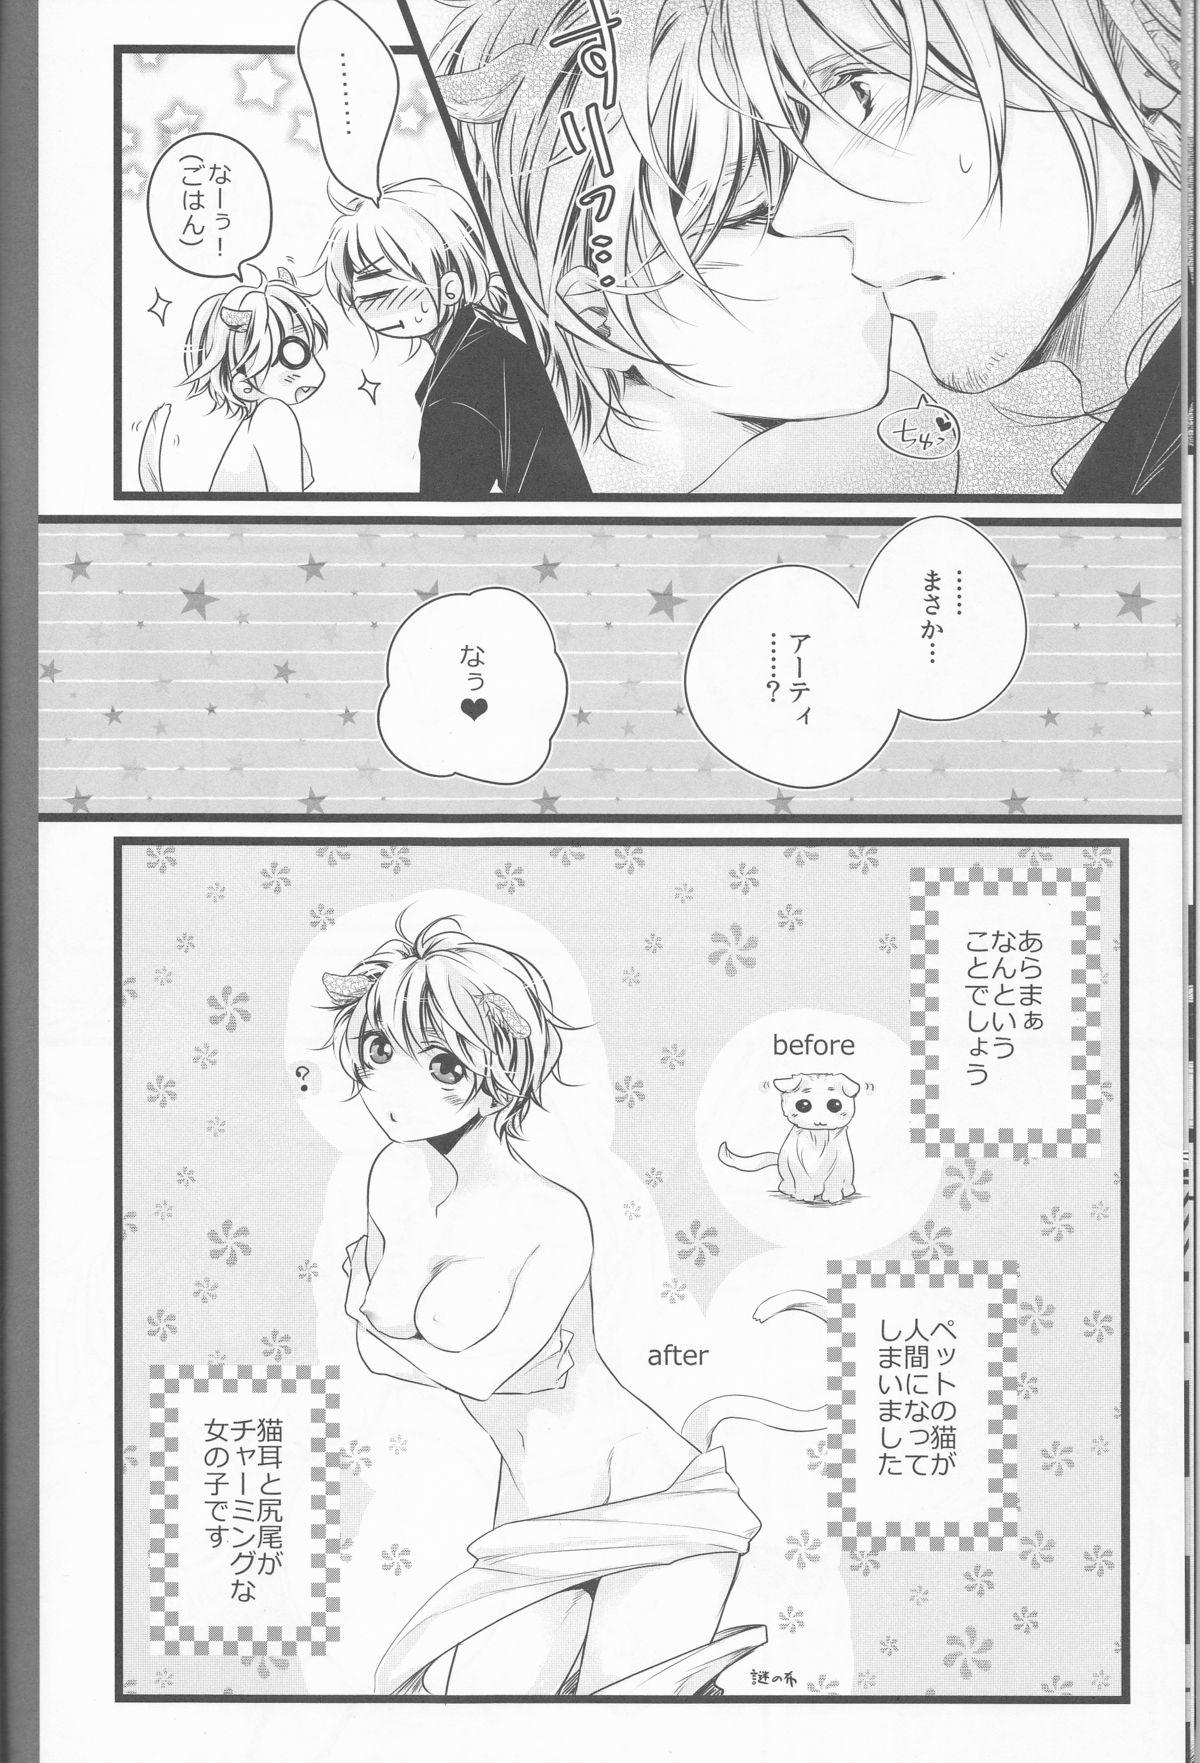 Lesbians ]Bell the cat! - Axis powers hetalia Rubia - Page 9